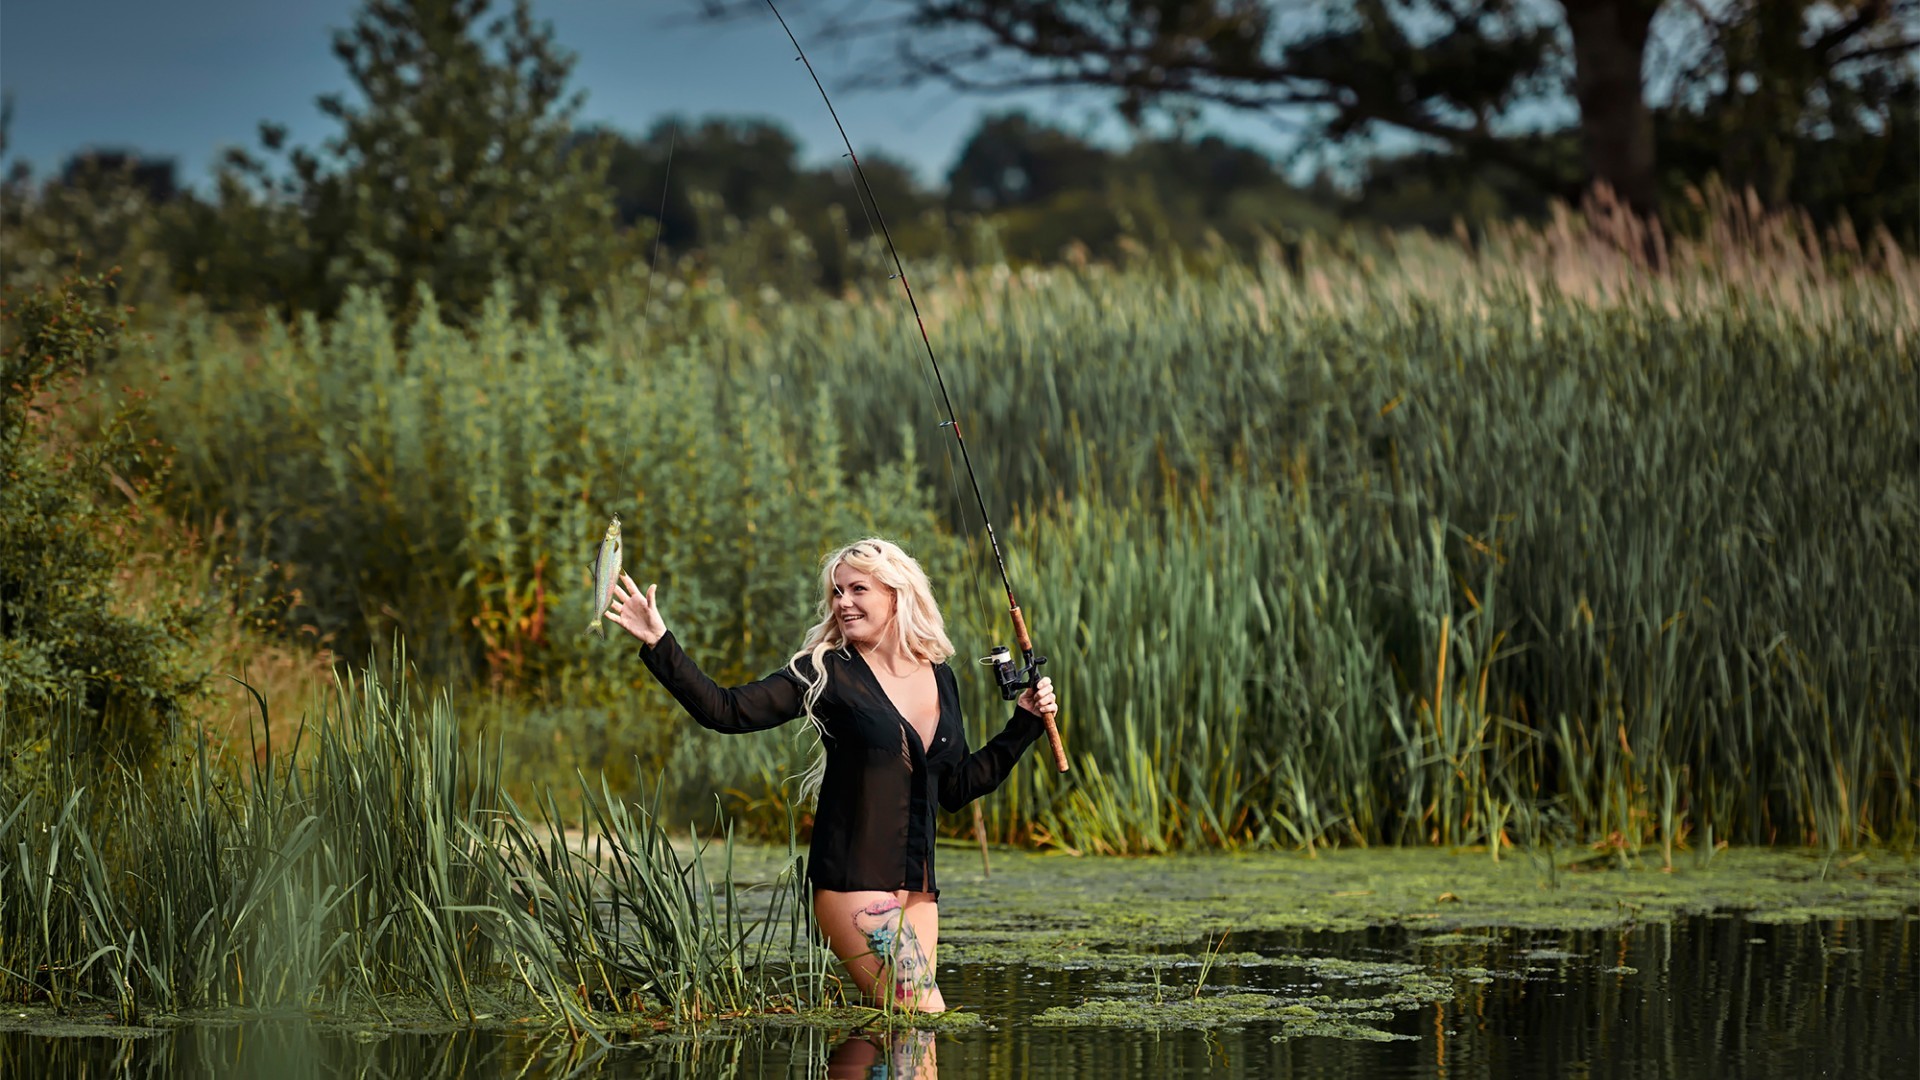 People 1920x1080 women model blonde long hair water lake long shirt black clothing fish fishing fishing rod smiling nature tattoo trees outdoors women outdoors animals in water standing partially clothed